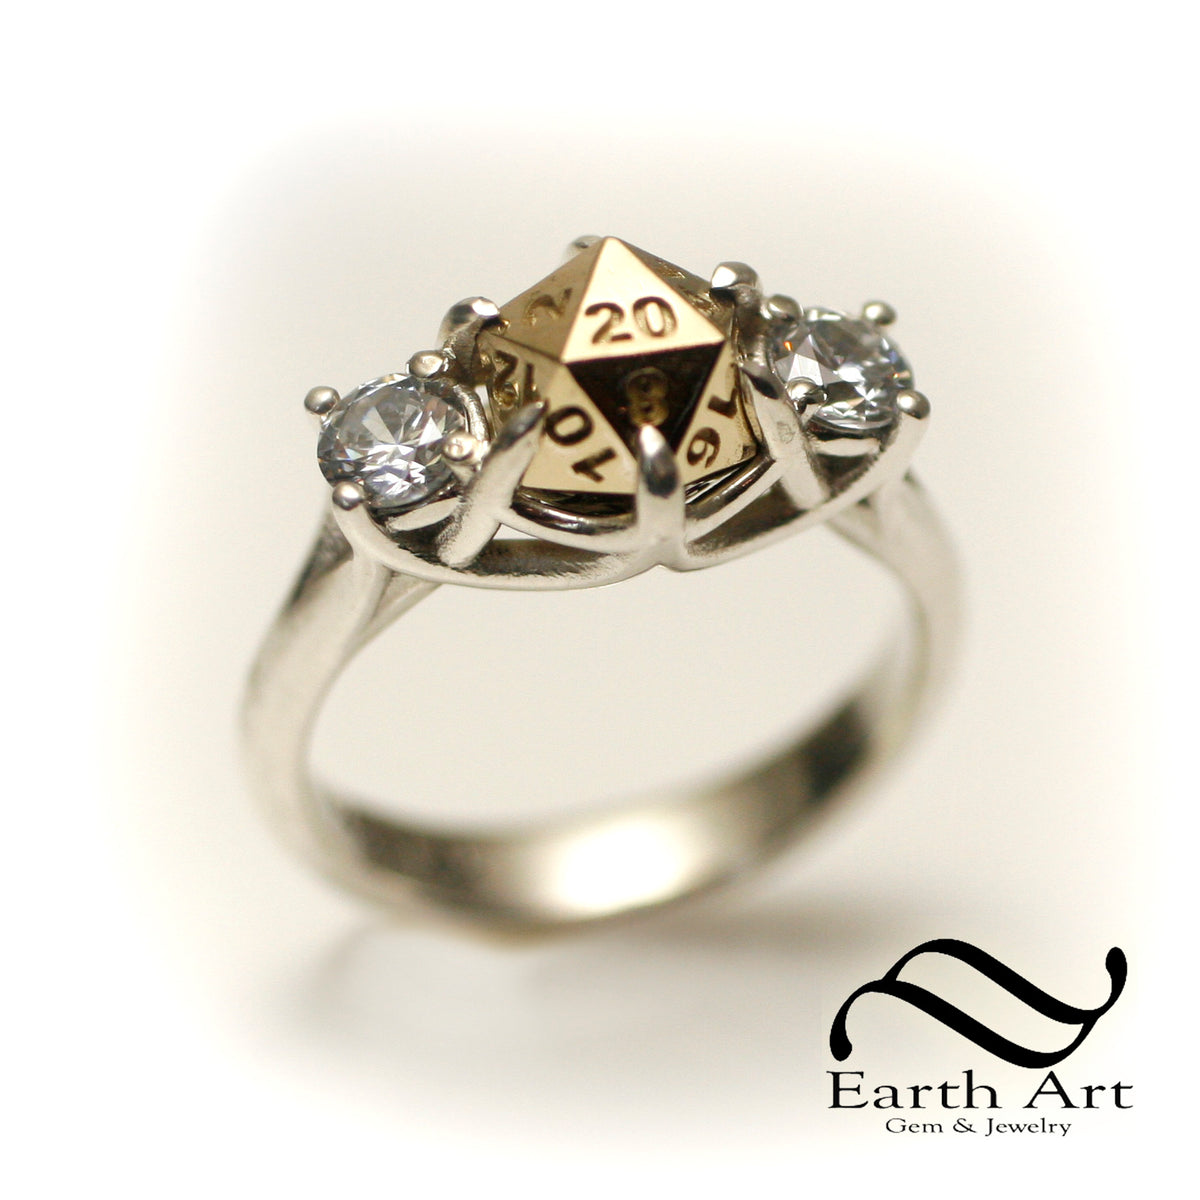 D20 Engagement ring in Mixed Metals - Sterling silver or white